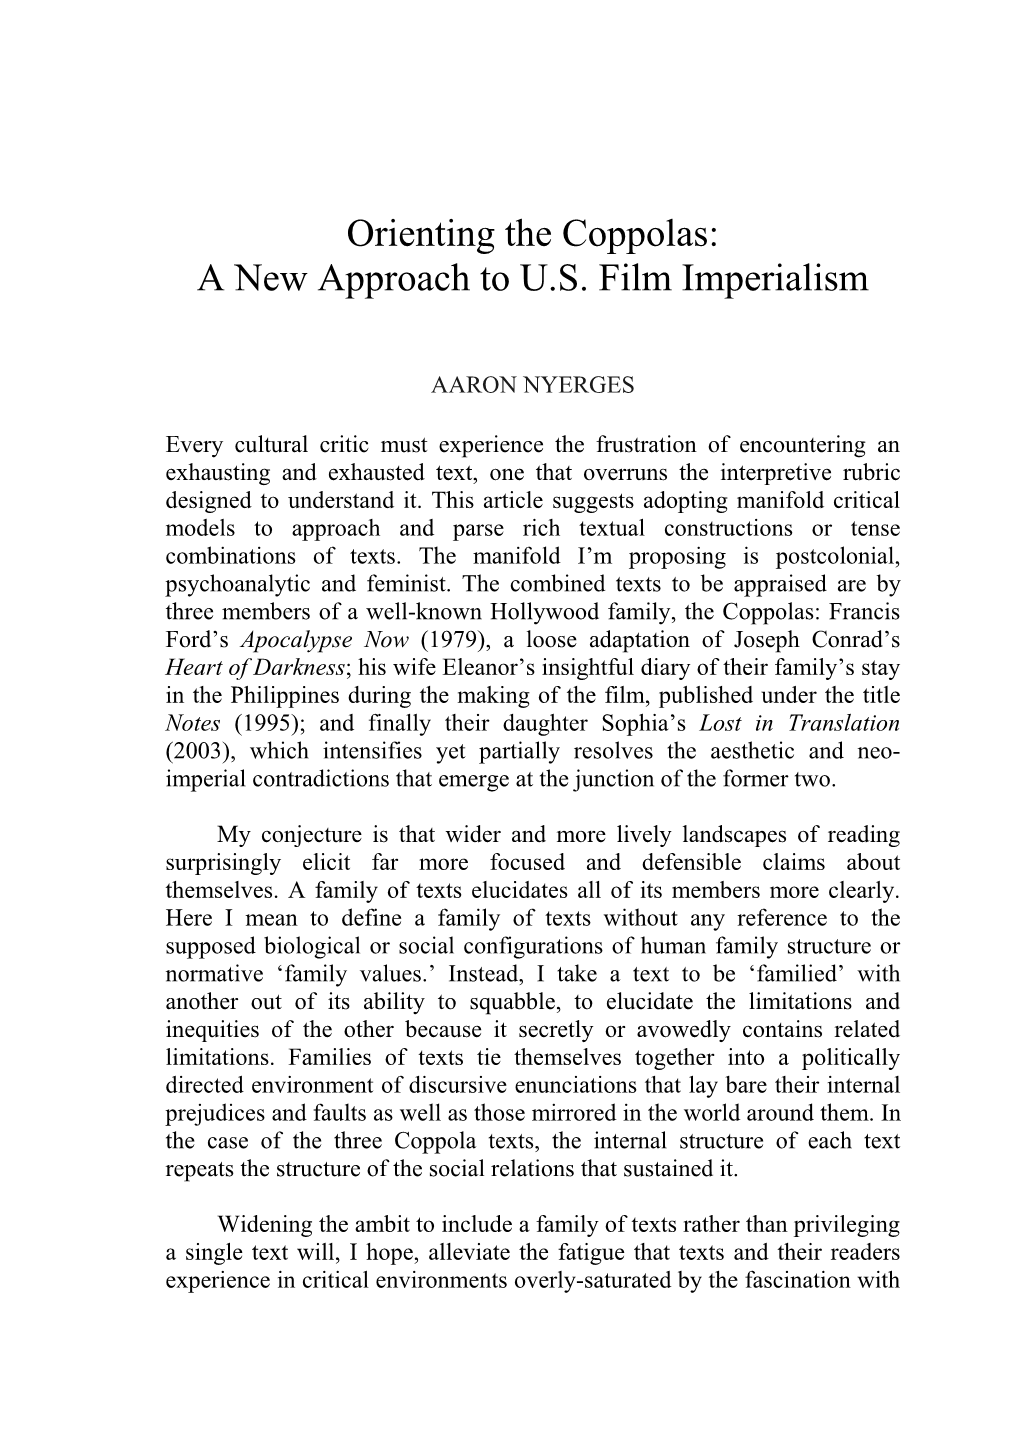 Orienting the Coppolas: a New Approach to U.S. Film Imperialism